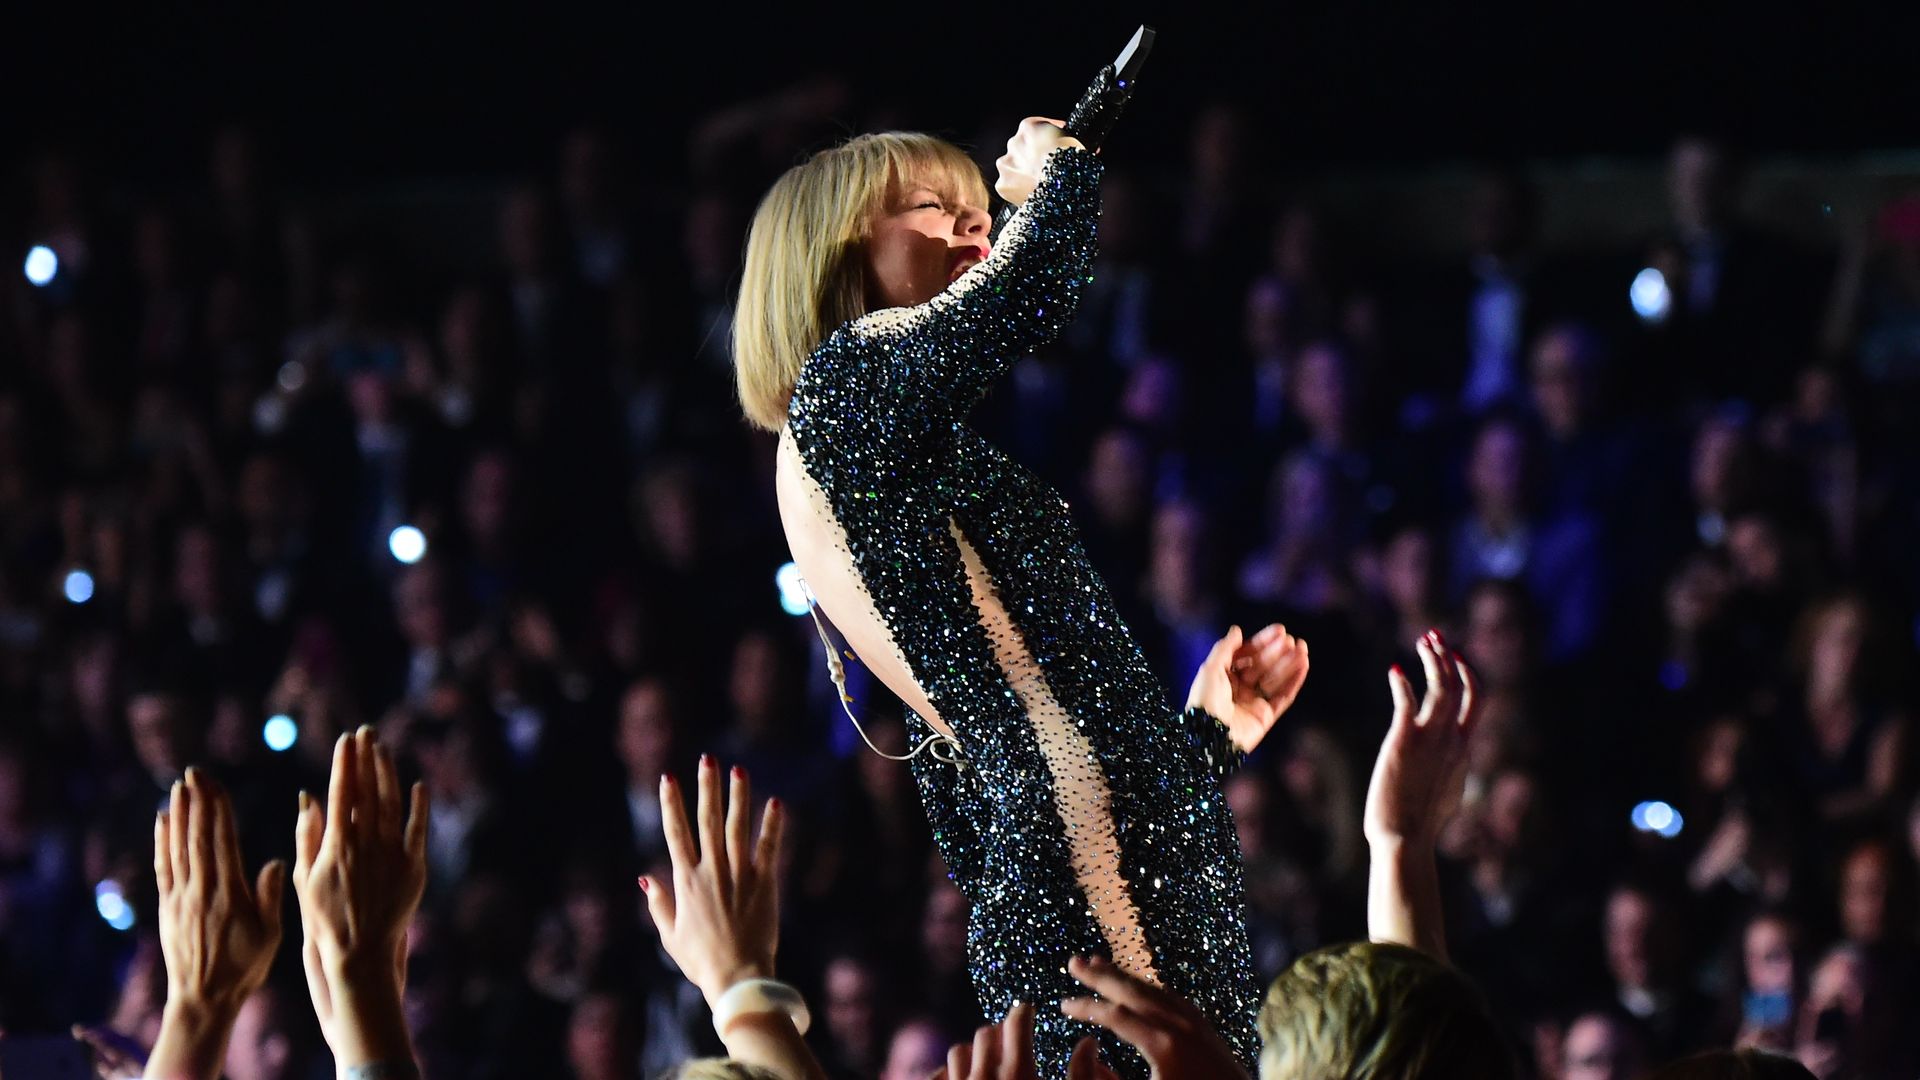 Taylor Swift performing at the Grammys.